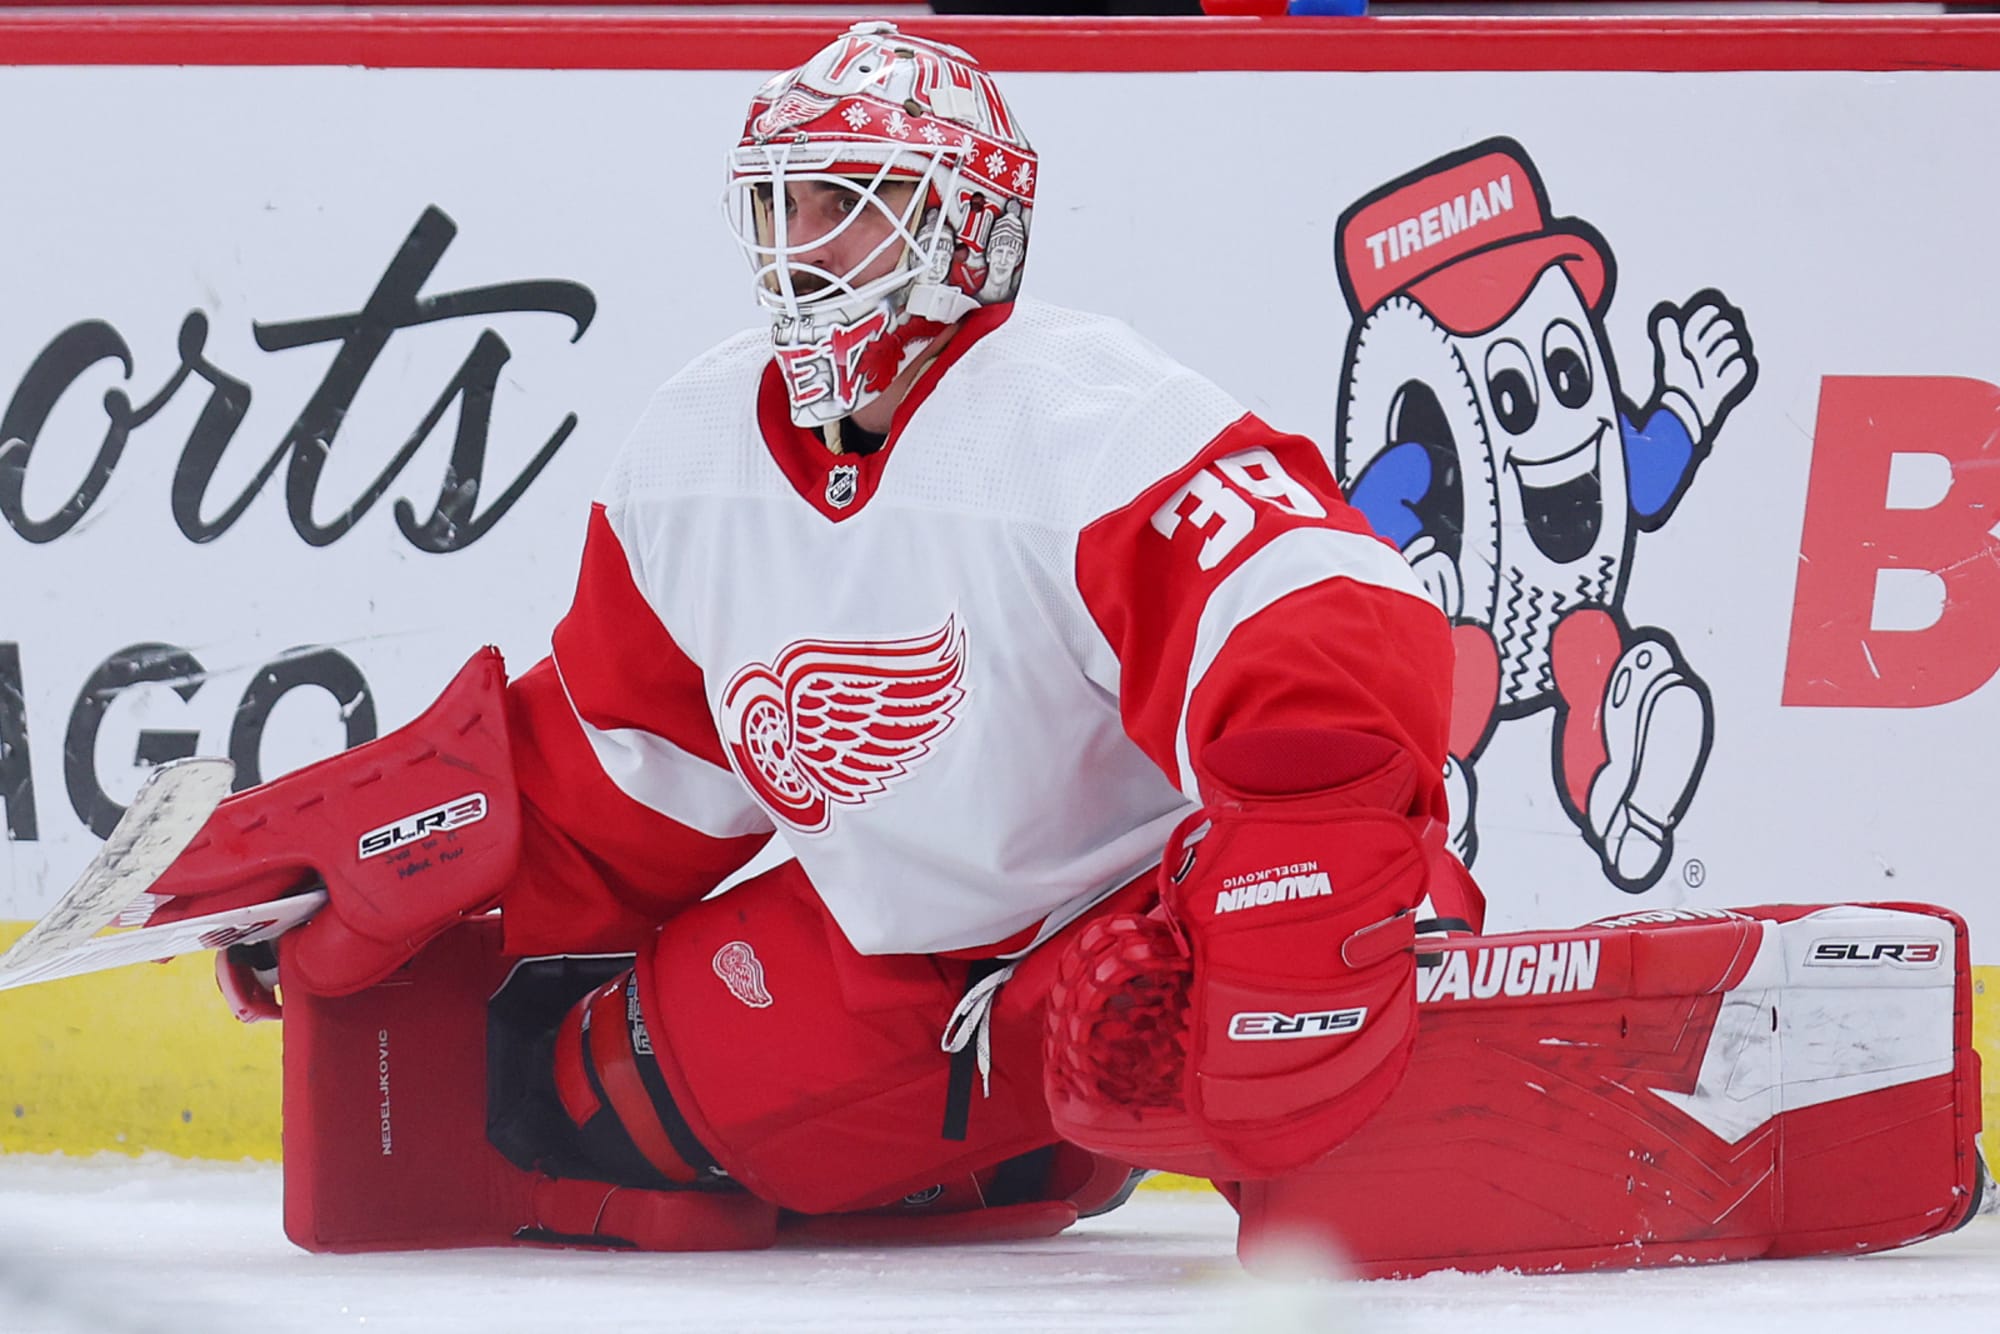 Detroit Red Wings 2022-23 season preview: Playoff chances